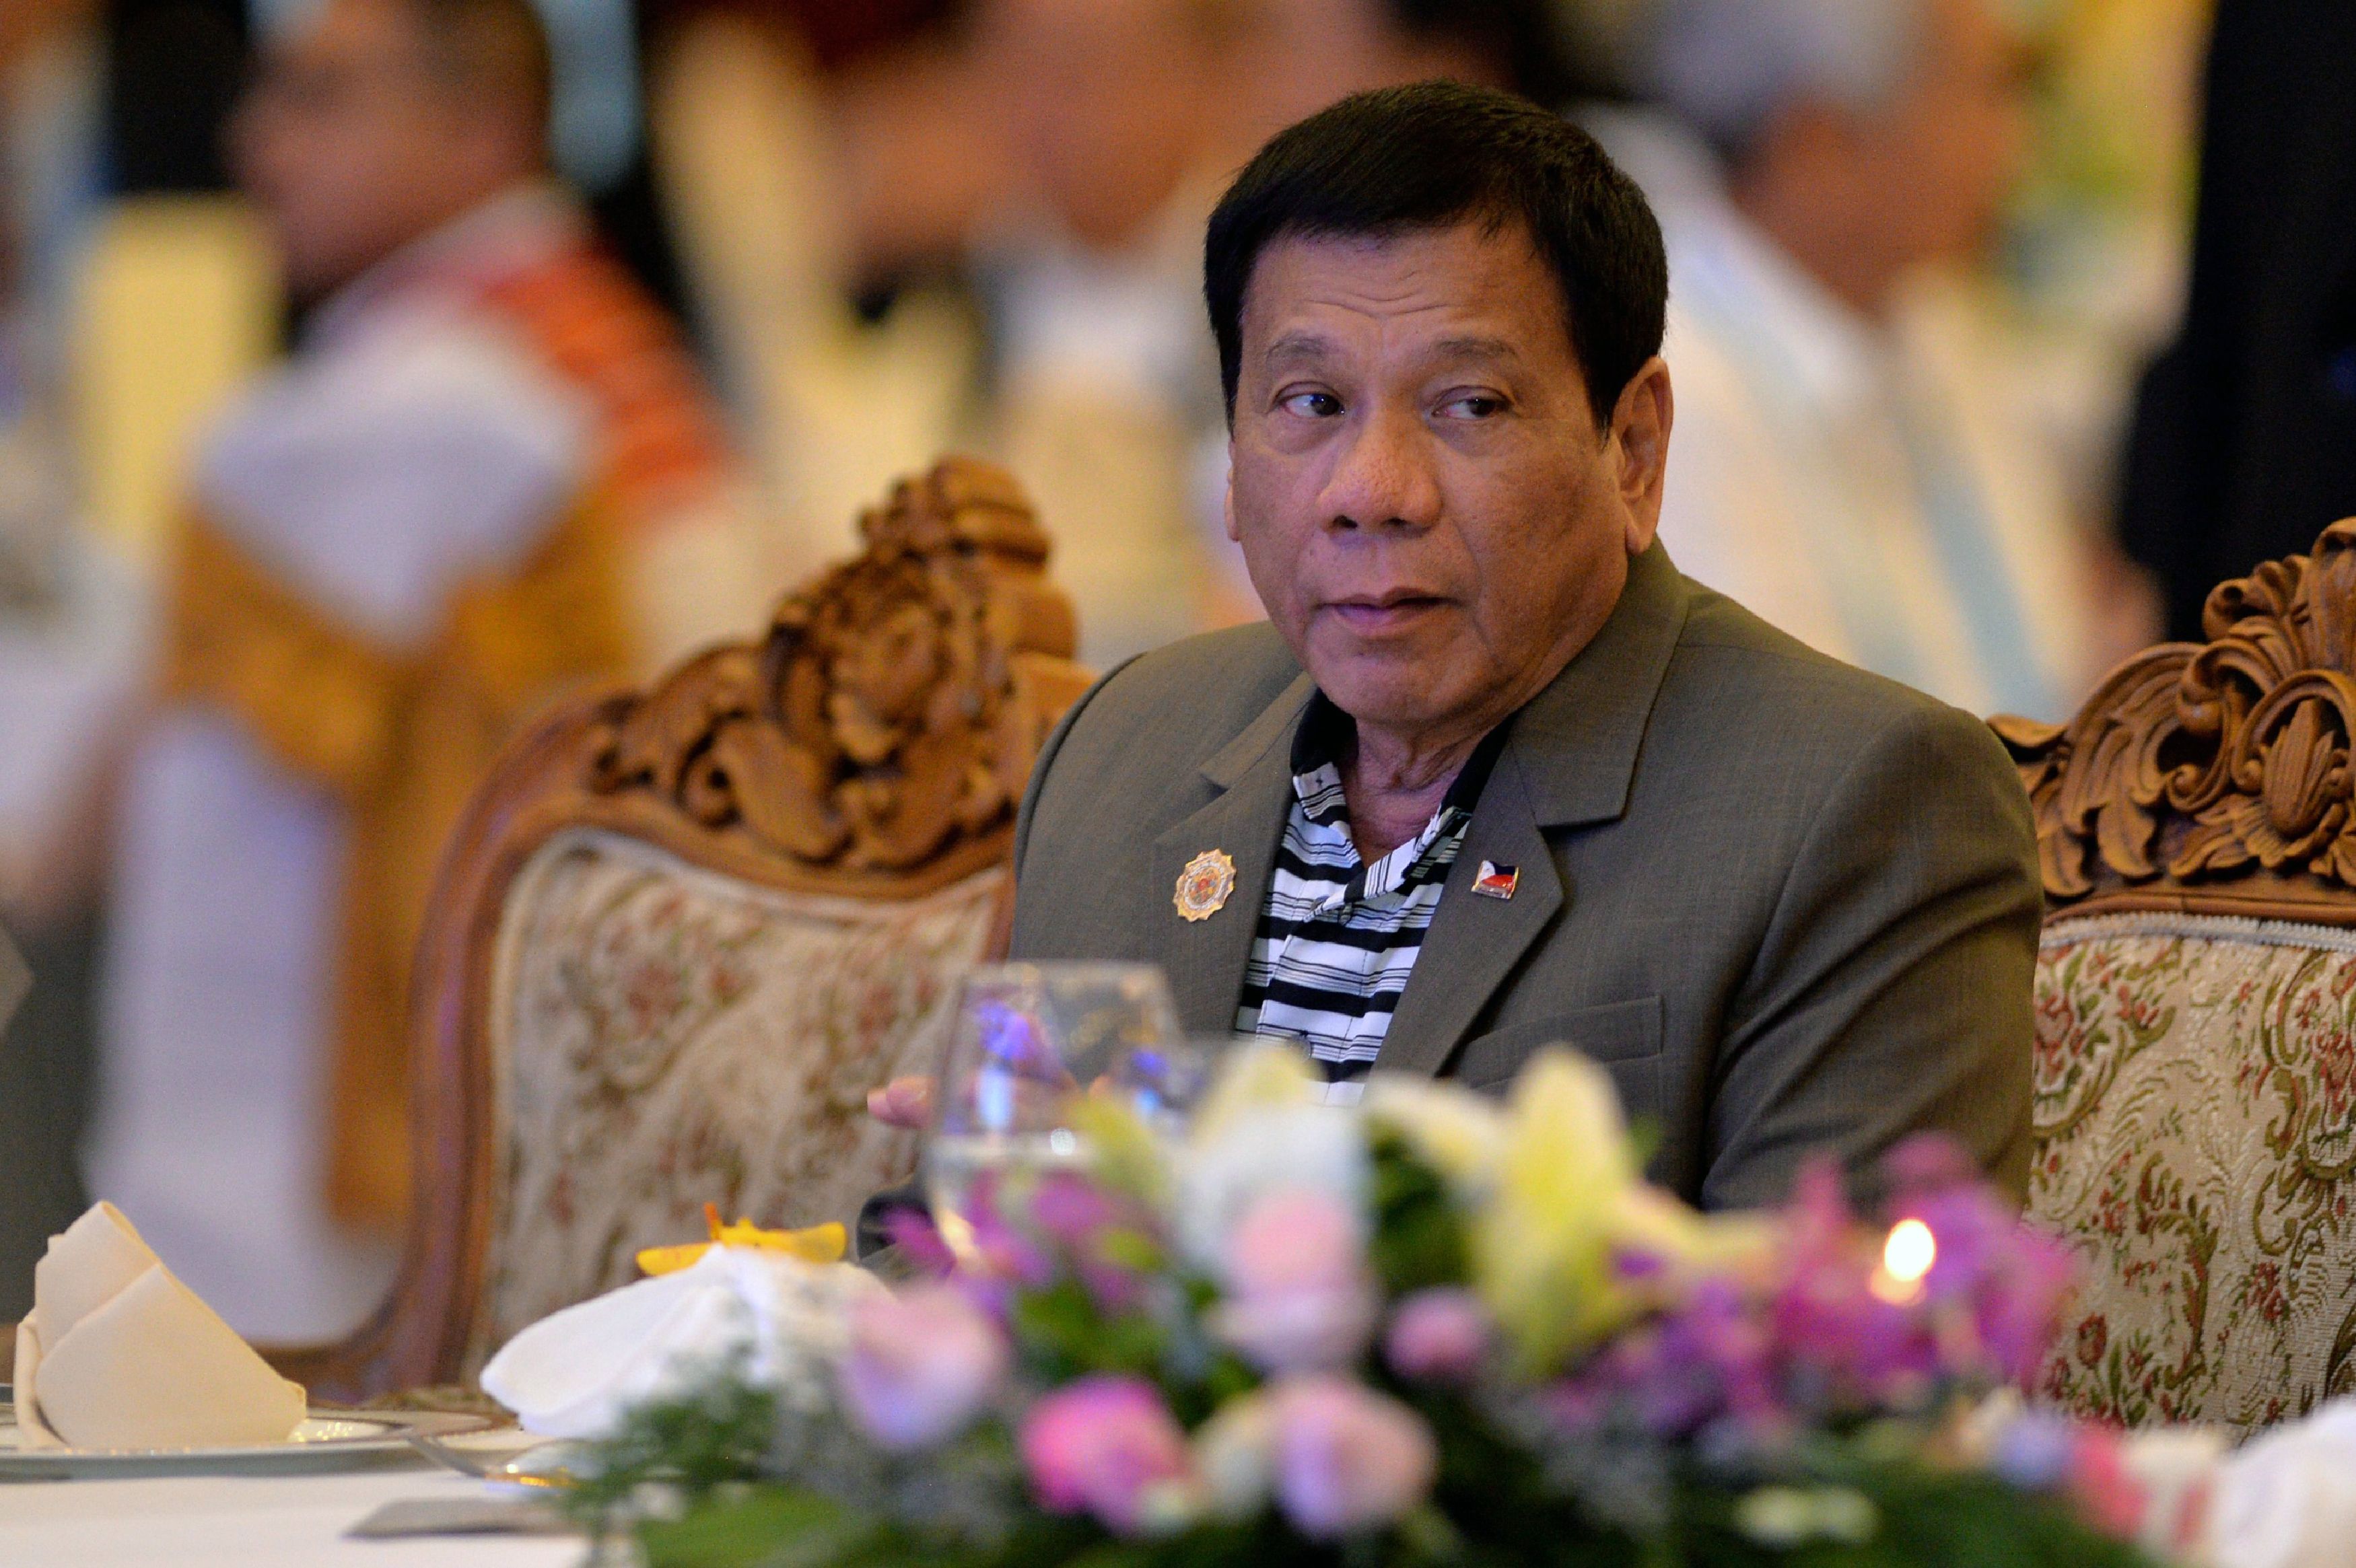 Philippine President Rodrigo Duterte attends a welcome dinner at the ASEAN Summit in Vientiane, Laos, on Sept. 6, 2016 (Ye Aung—AFP/Getty Images)